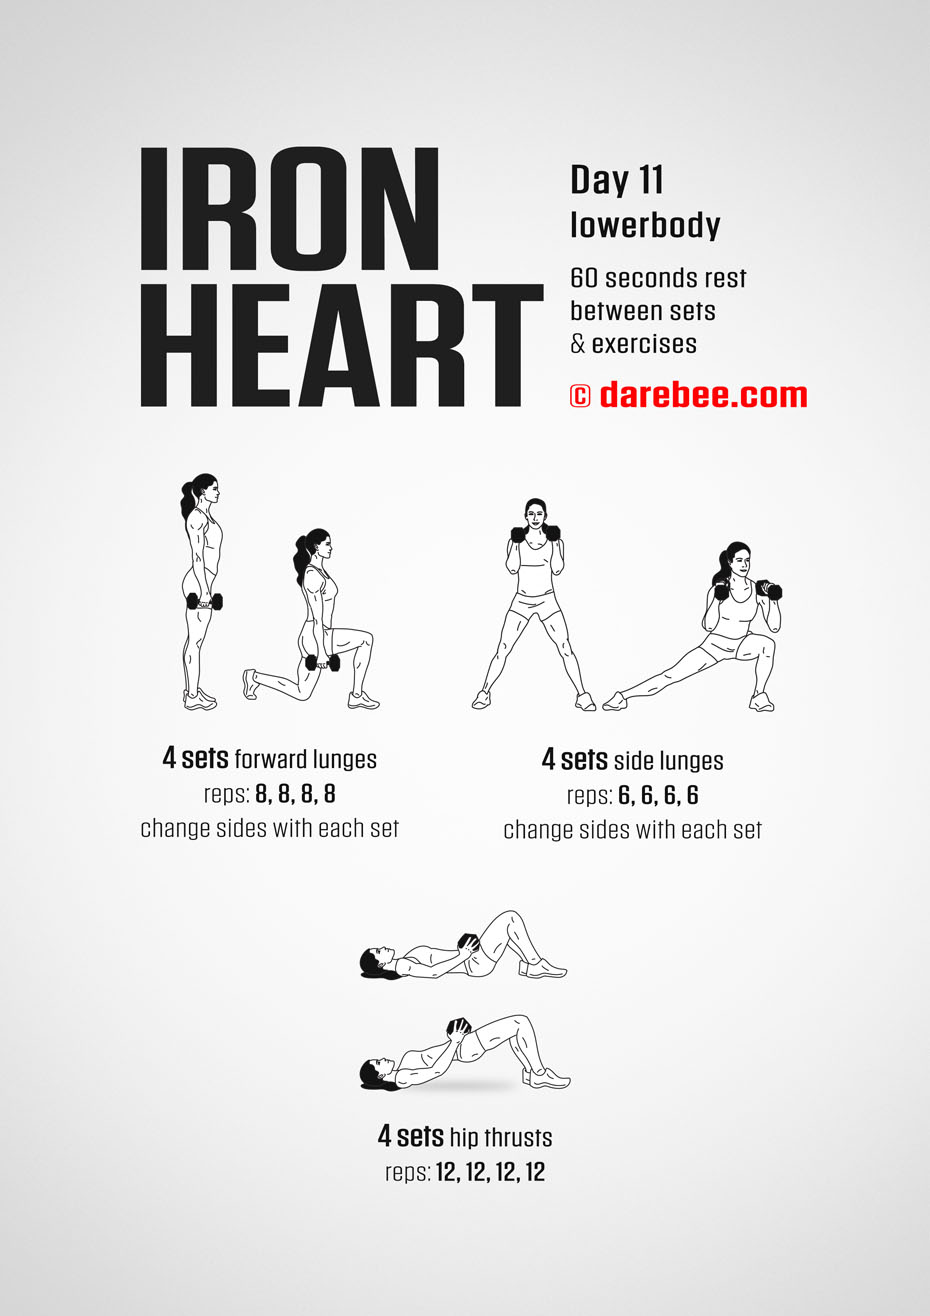 Ironheart - 30 Day Muscle Definition Dumbbell Program by DAREBEE